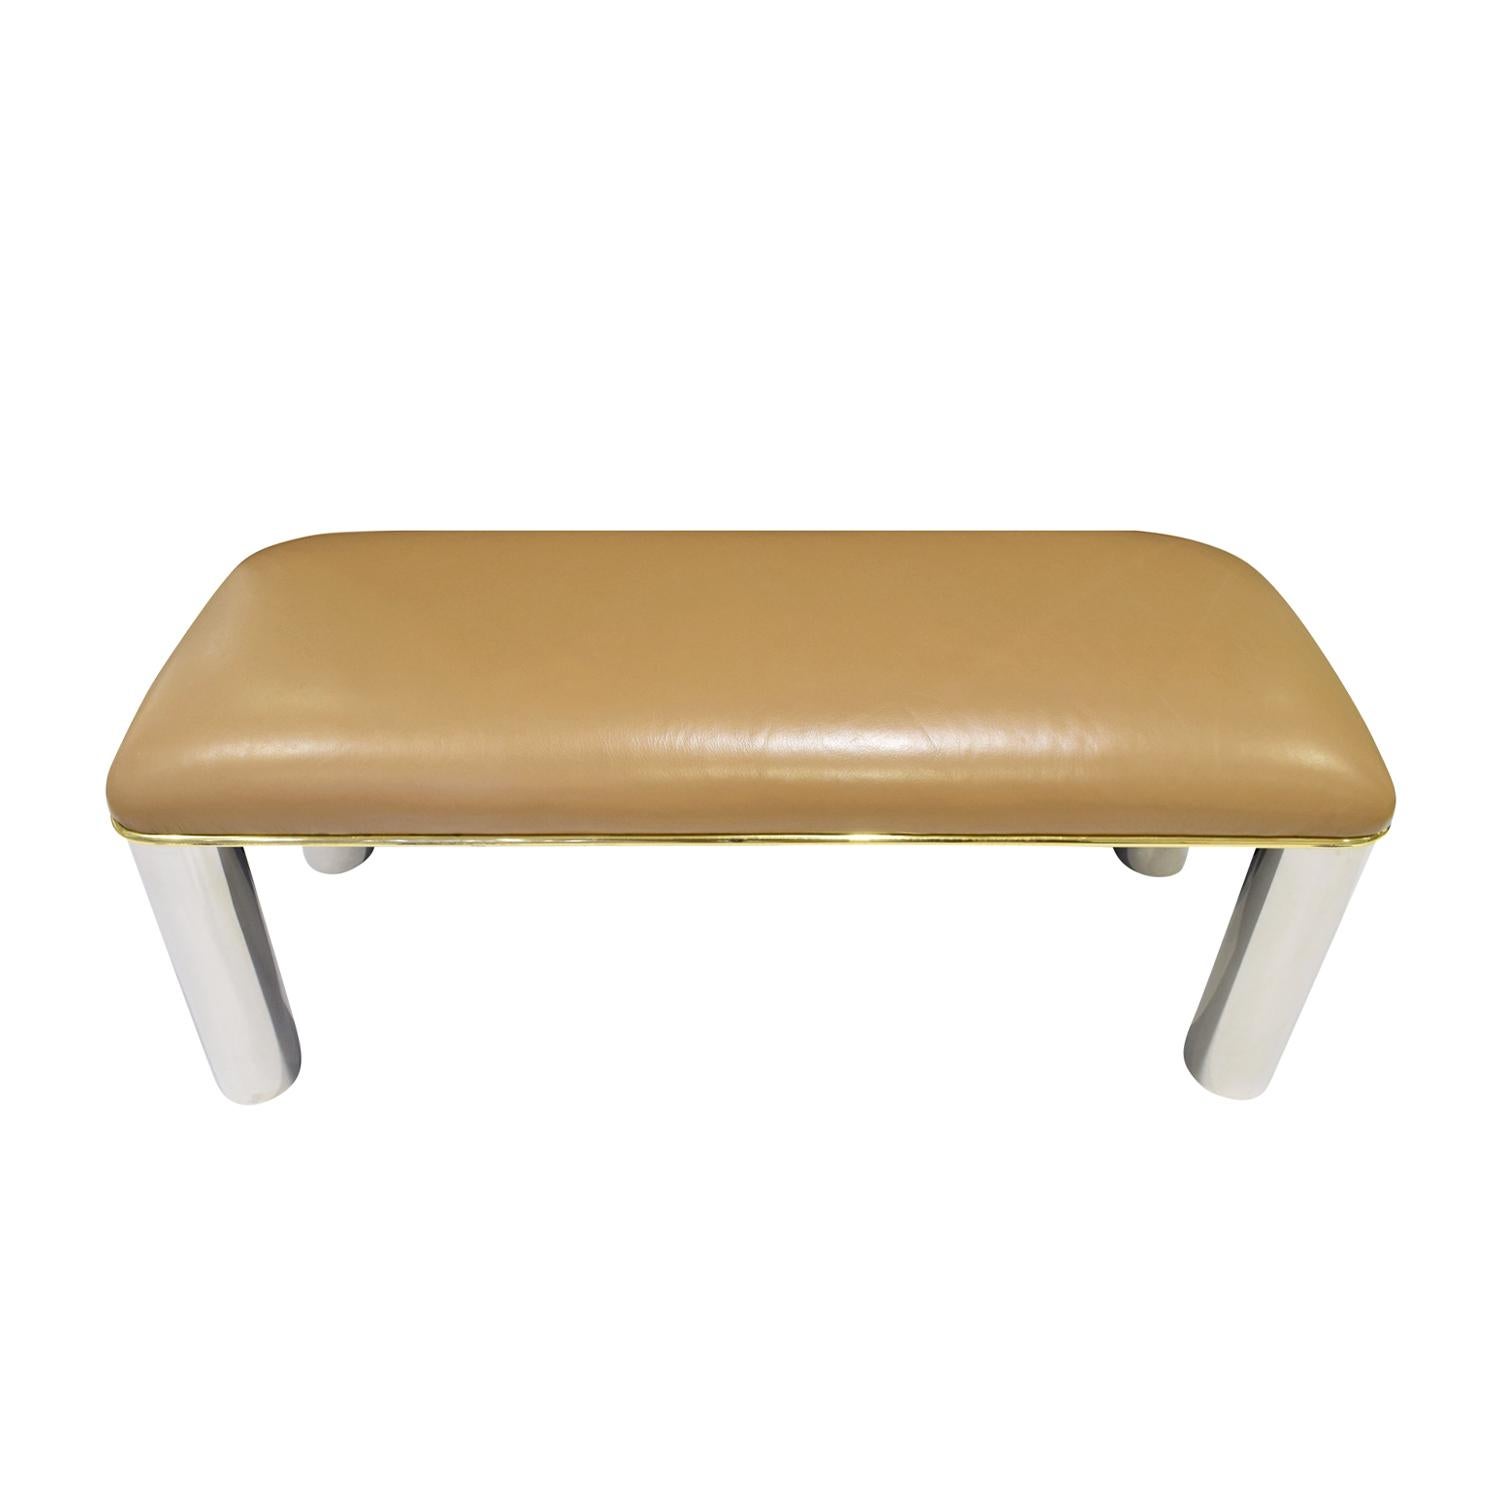 Mid-Century Modern Karl Springer Bench in Polished Stainless Steel and Brass, 1980s